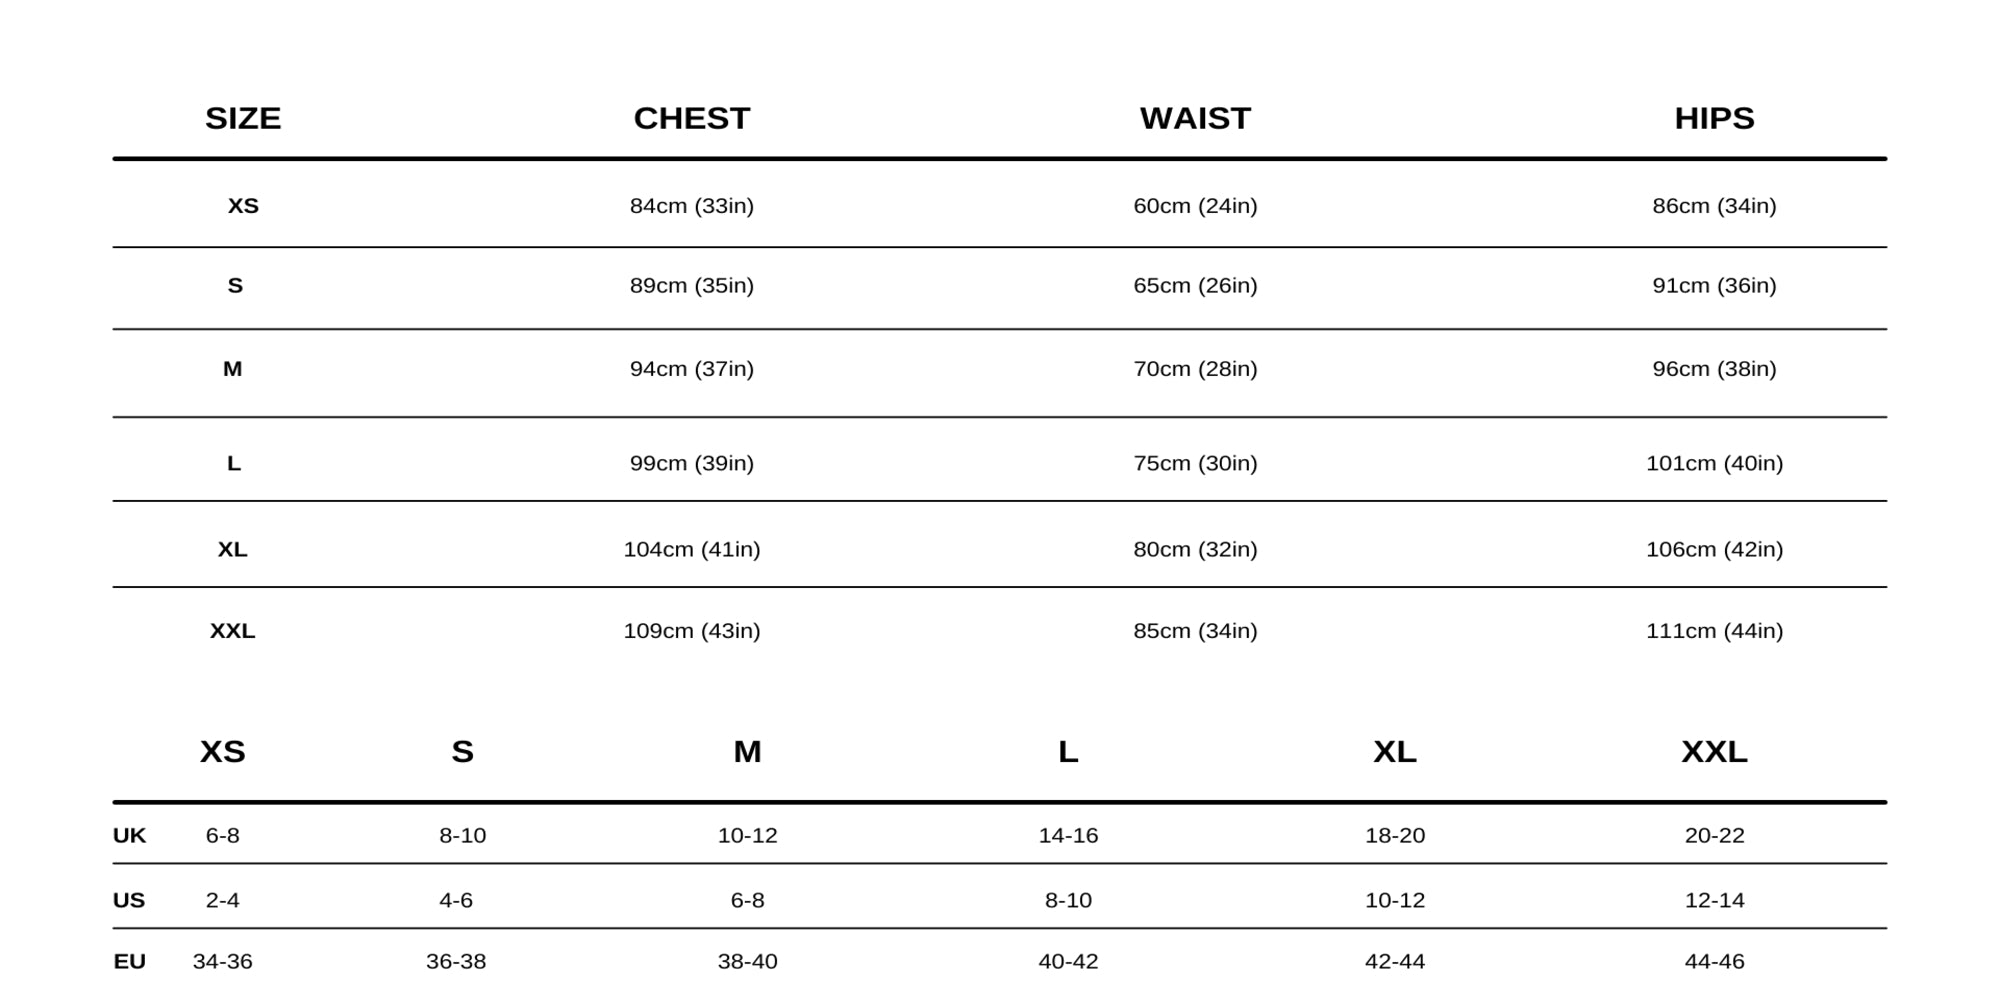 womens size guide